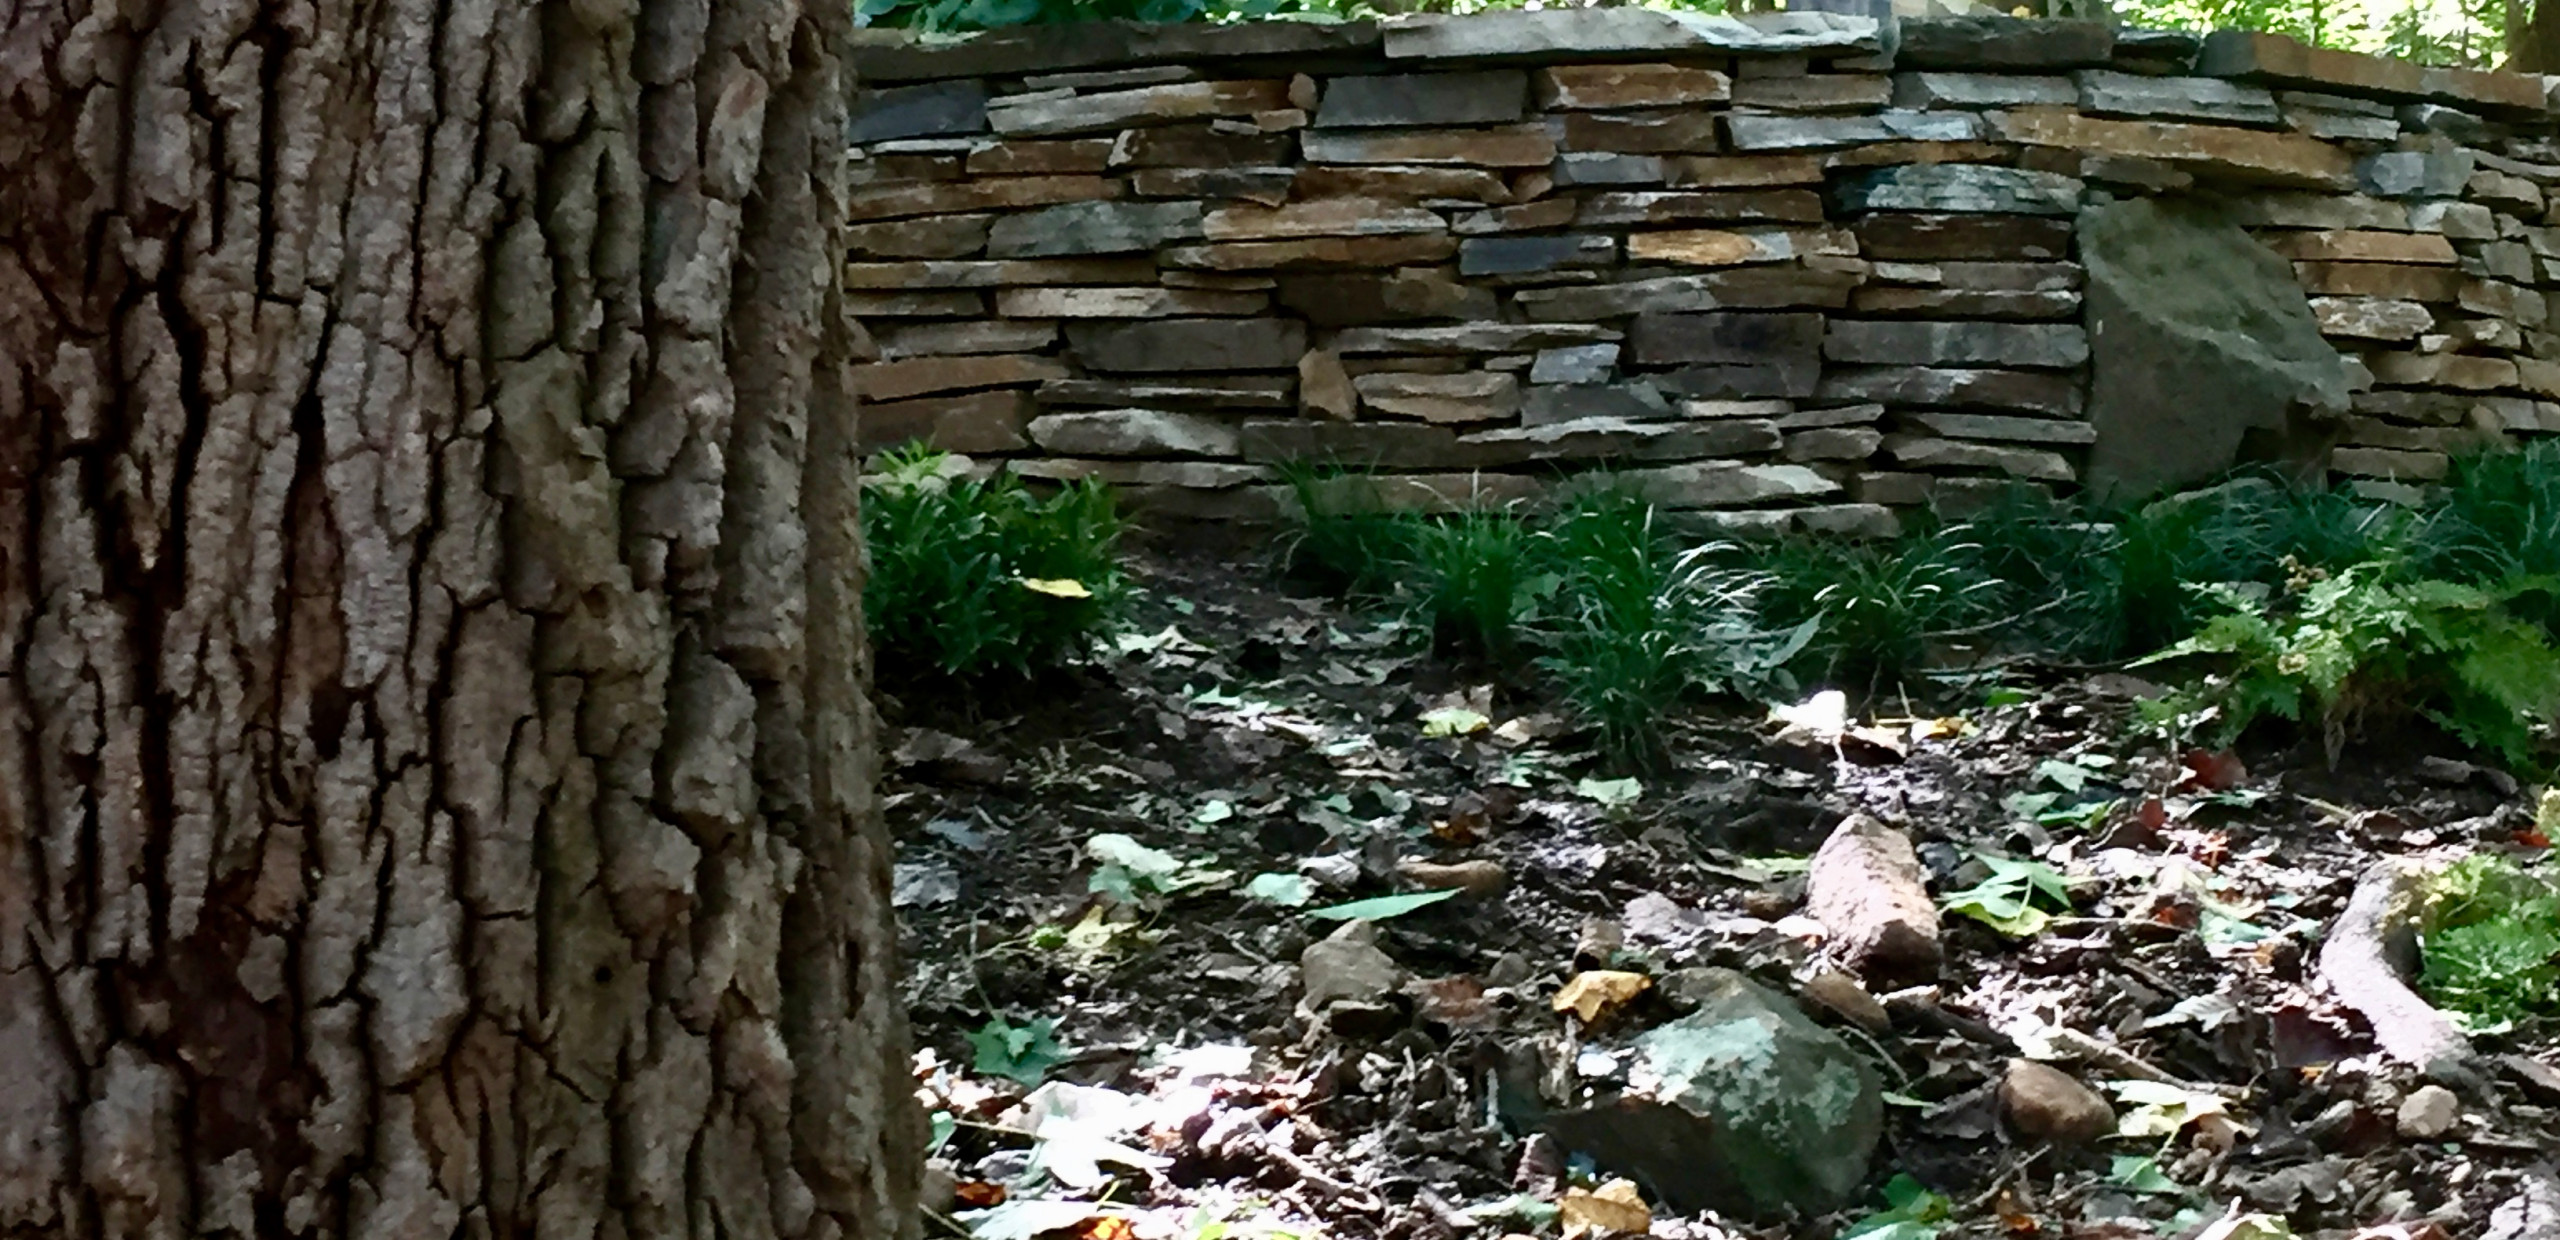 Study in Texture:  Tree and Stone